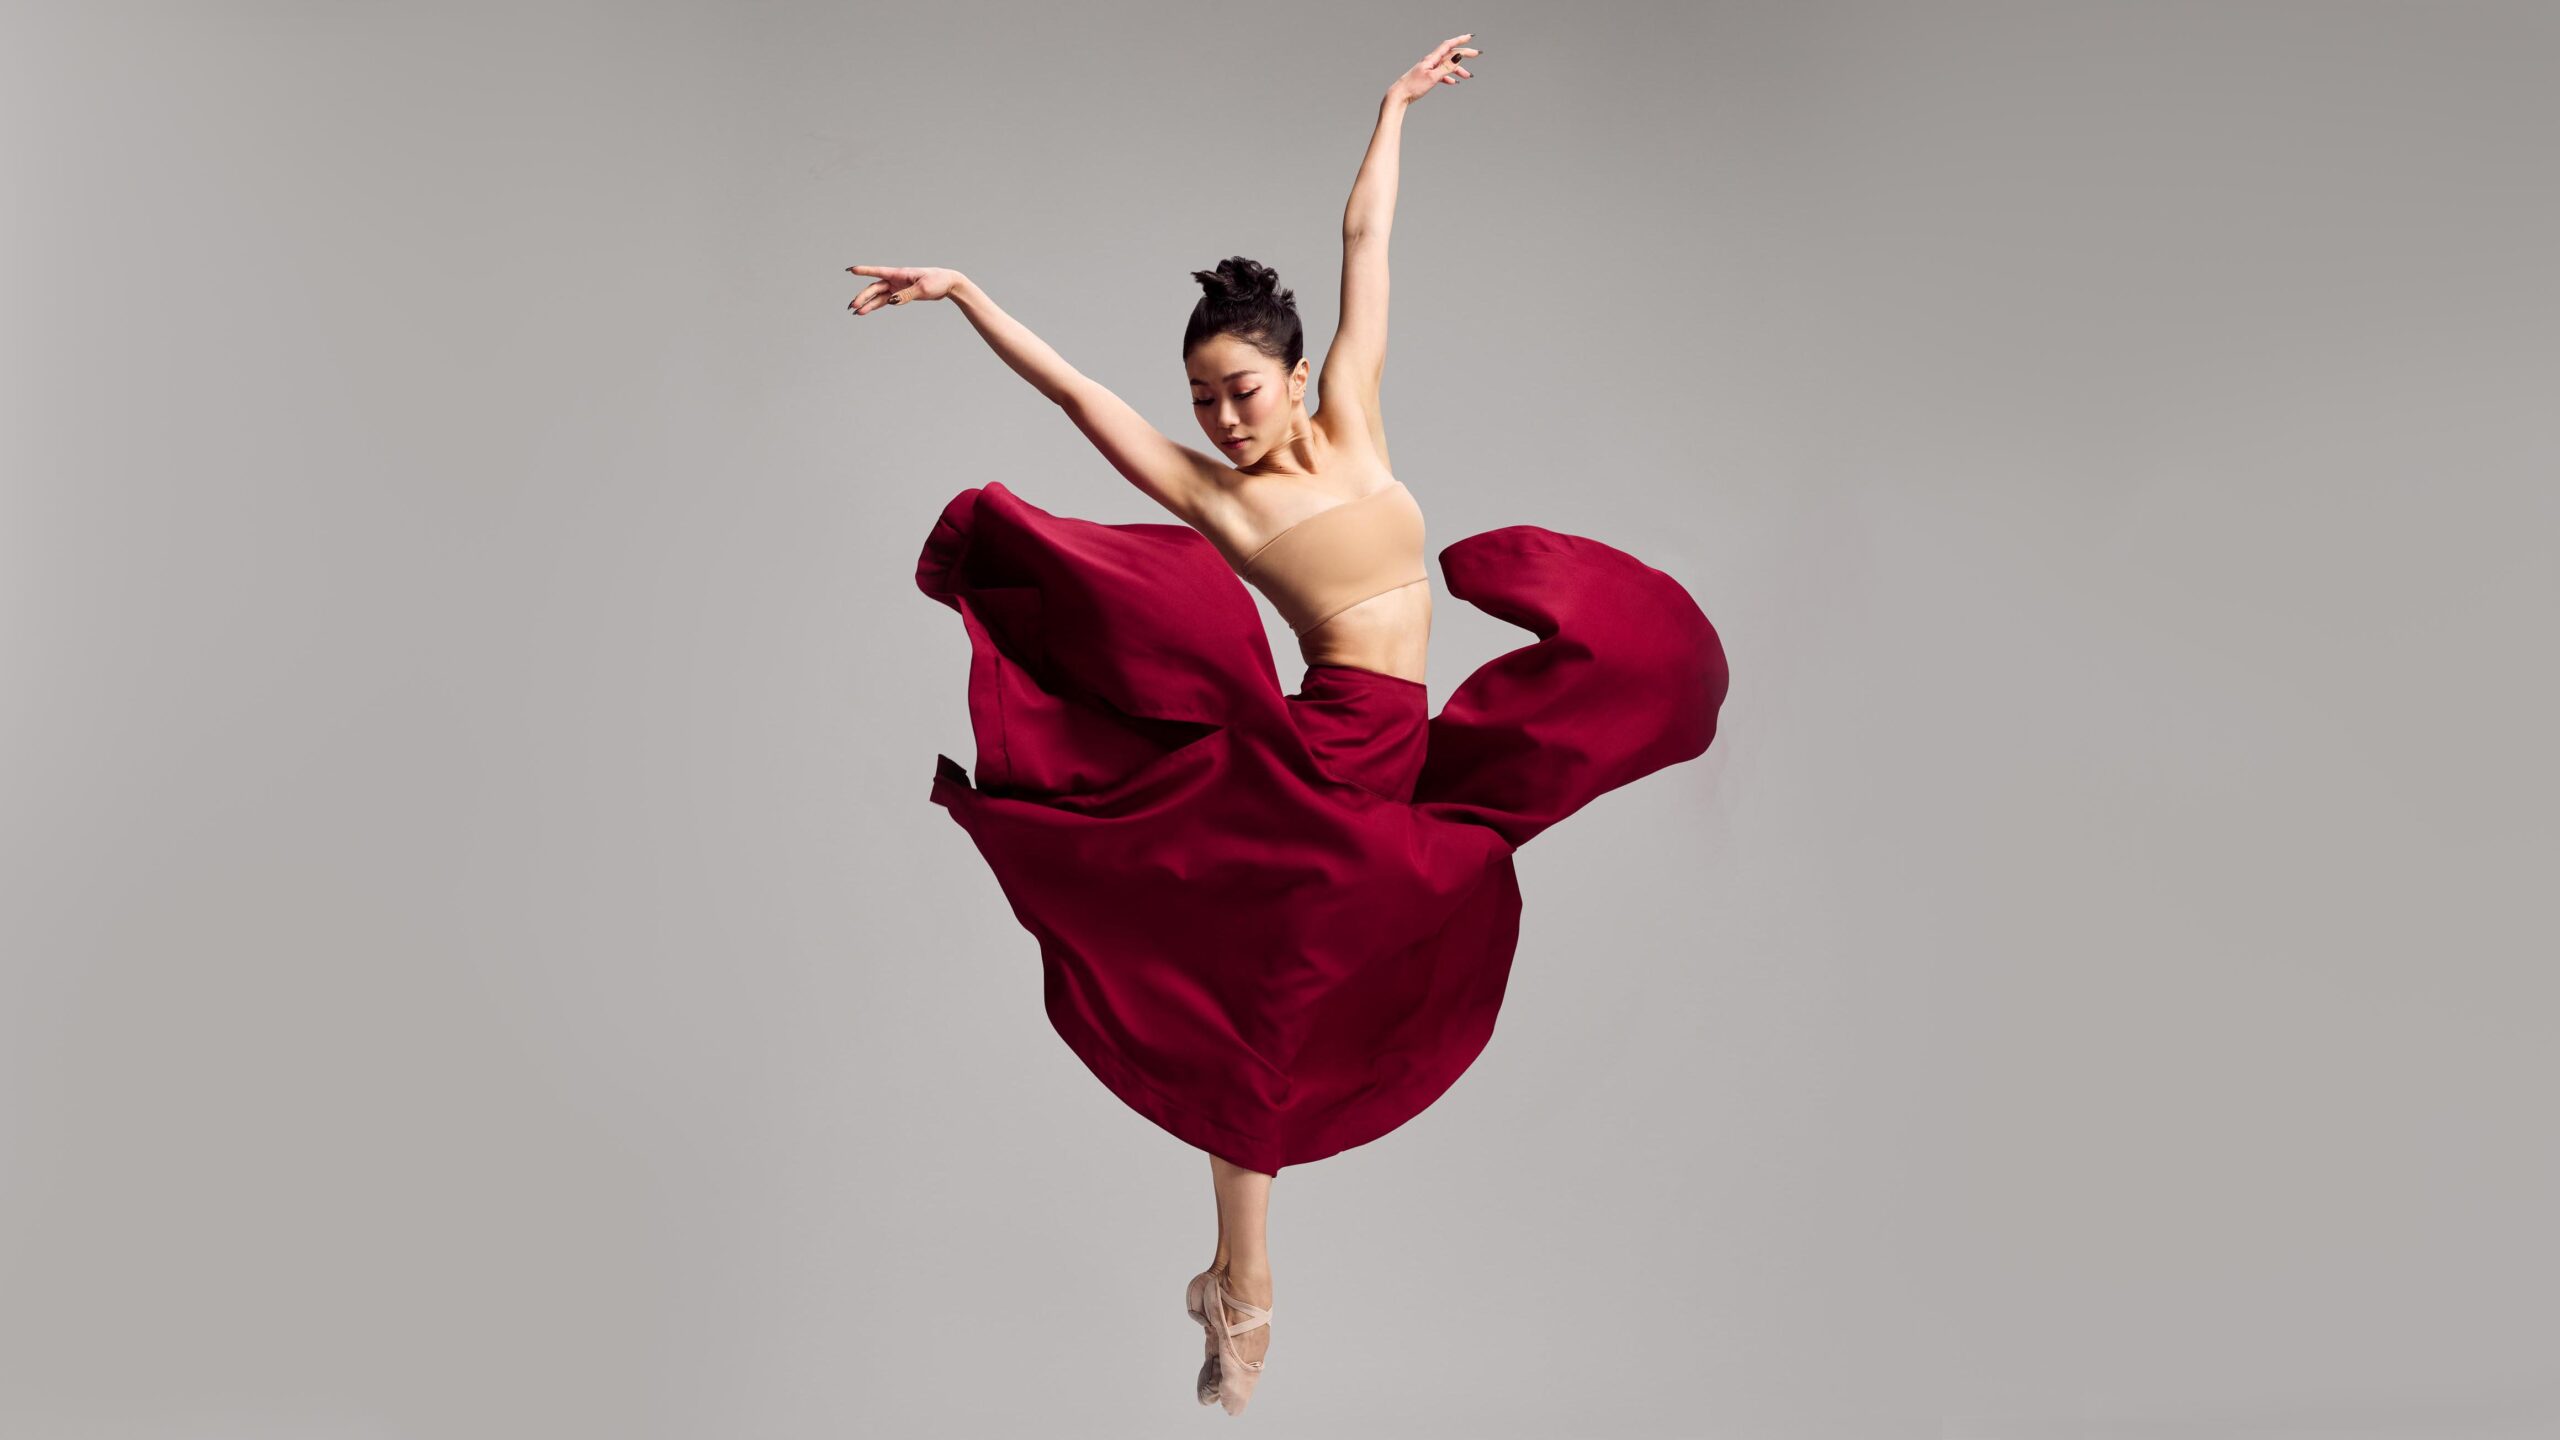 Minori Sakita jumps straight up into the air, her ihps and legs facing her left as she twists her upper body to the right. Her legs are in parallel with pointed feet, and the dancer raises her arms up in a V shape as she looks down towards her right. She wears a tan bandeau top and a long burgundy skirt, which billows up around her as she jumps.